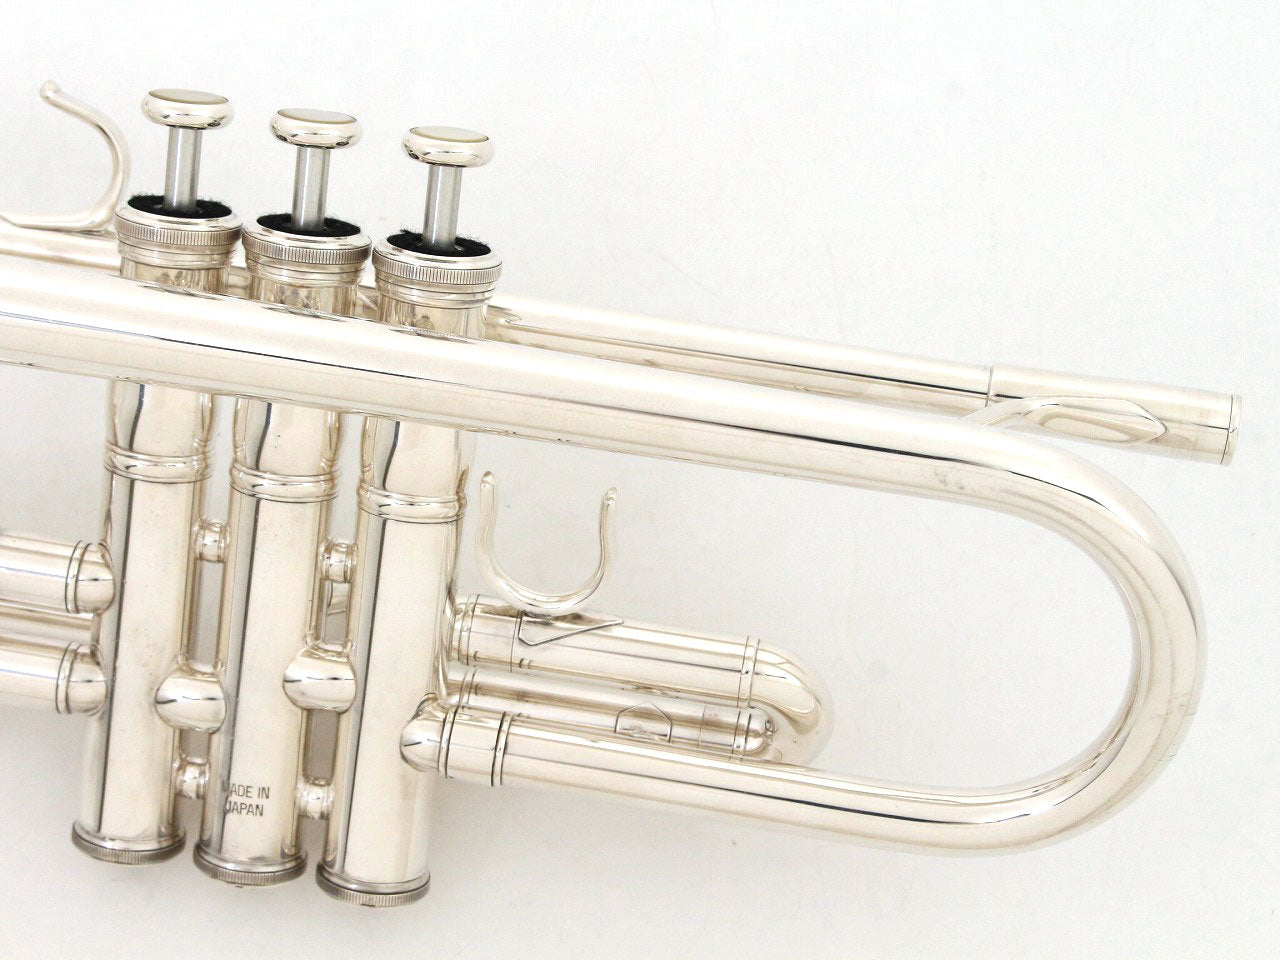 [SN 460736] USED YAMAHA / Trumpet YTR-8335GS Gold brass, silver plated finish [11]